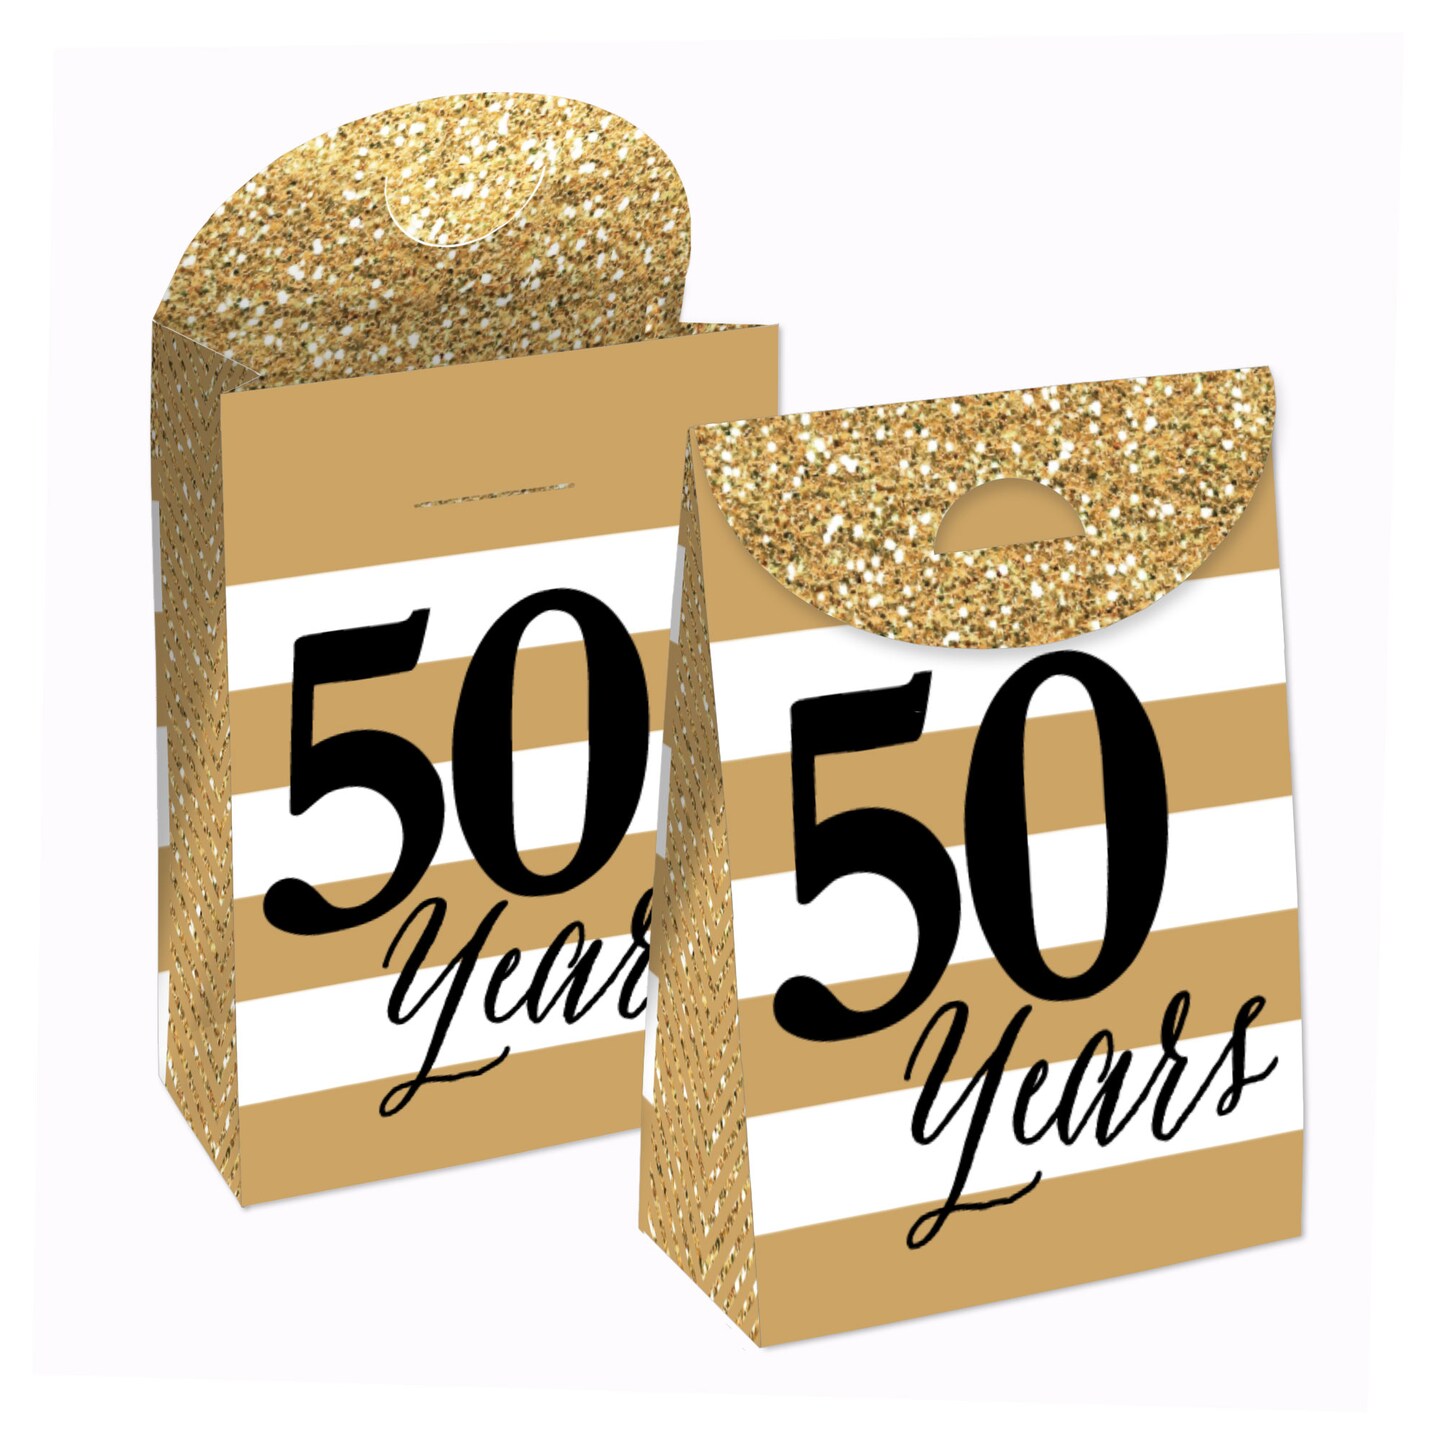 Big Dot of Happiness We Still Do - 50th Wedding Anniversary - Anniversary Gift Favor Bags - Party Goodie Boxes - Set of 12